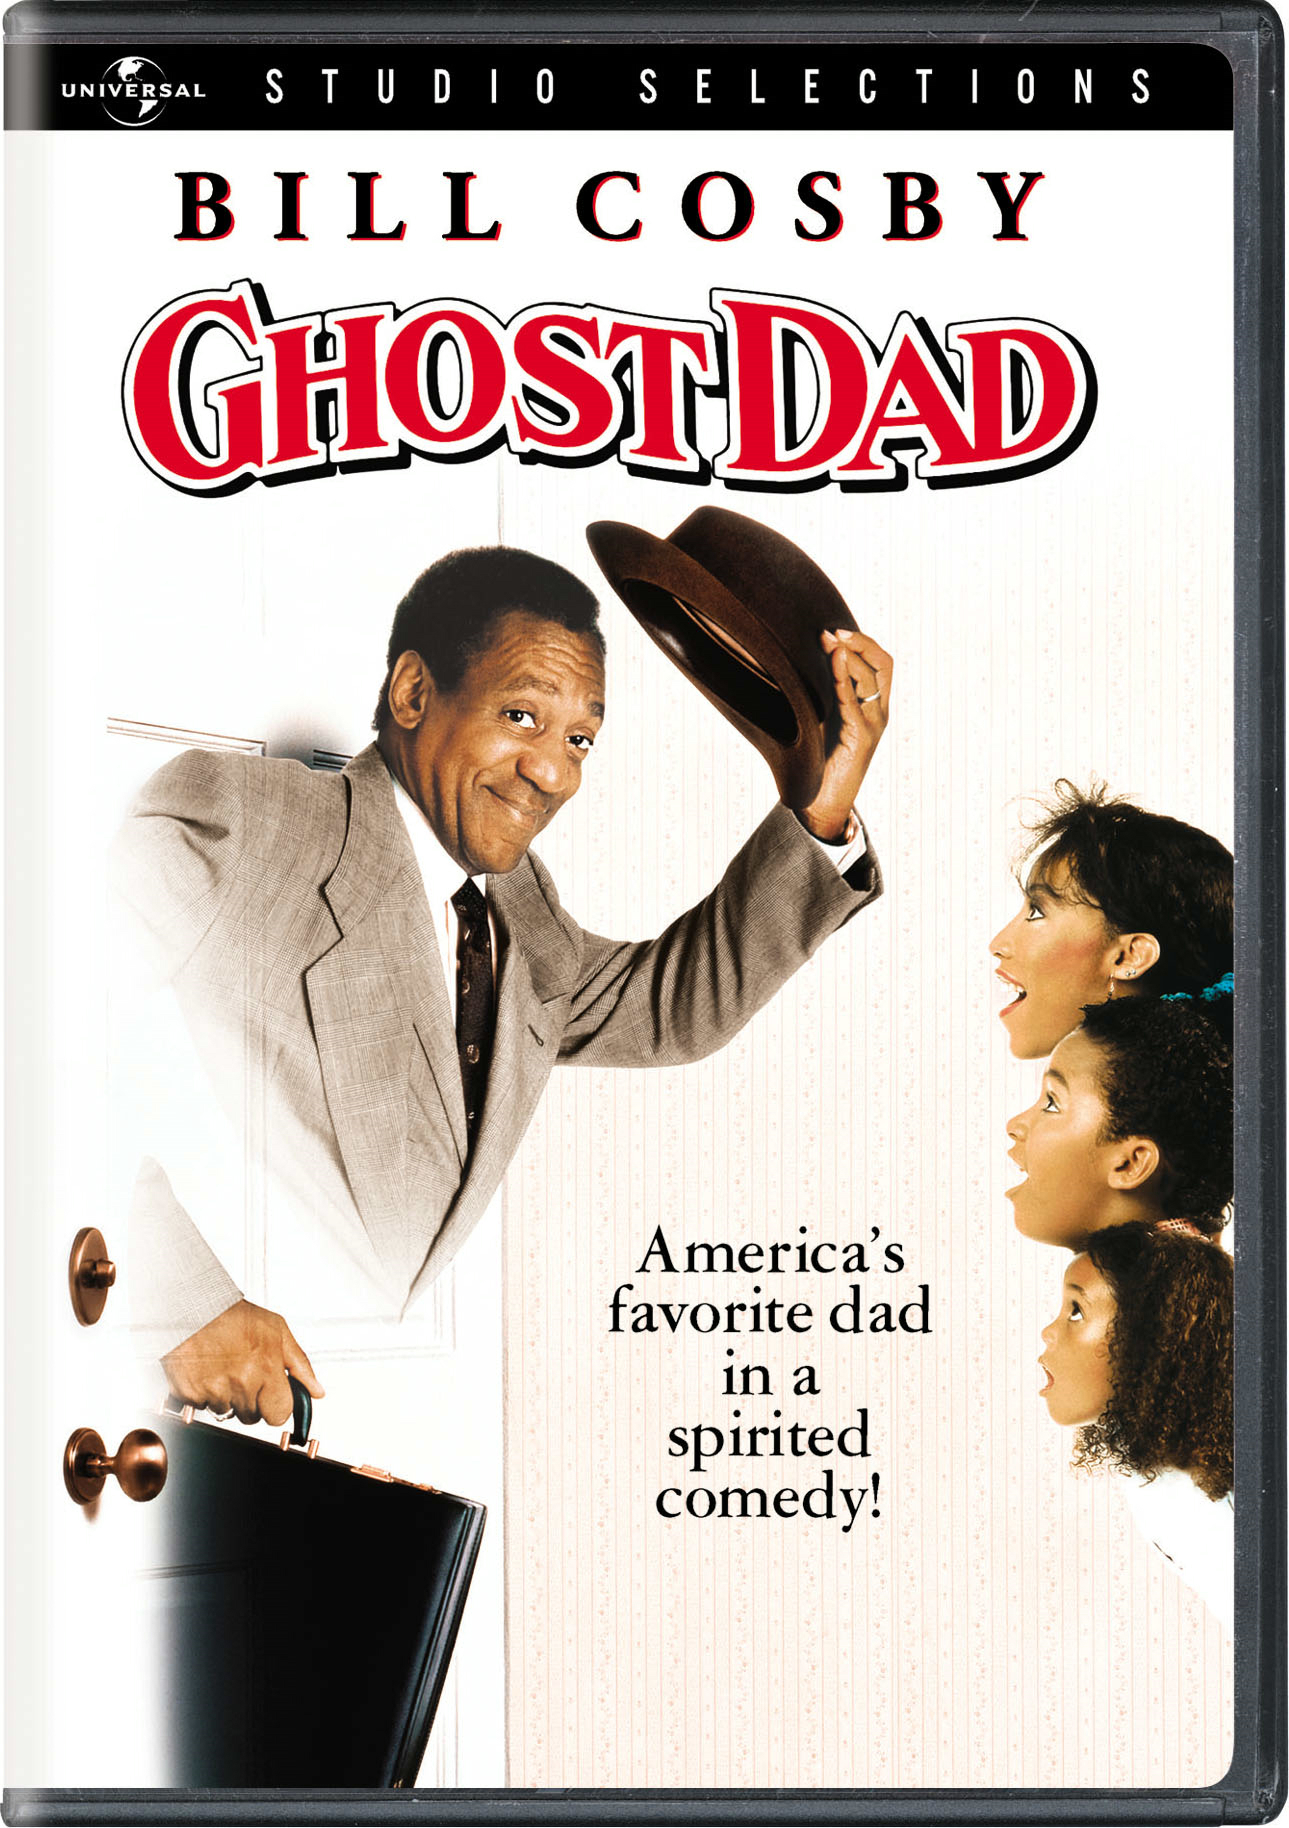 Ghost Dad - DVD [ 1990 ]  - Comedy Movies On DVD - Movies On GRUV